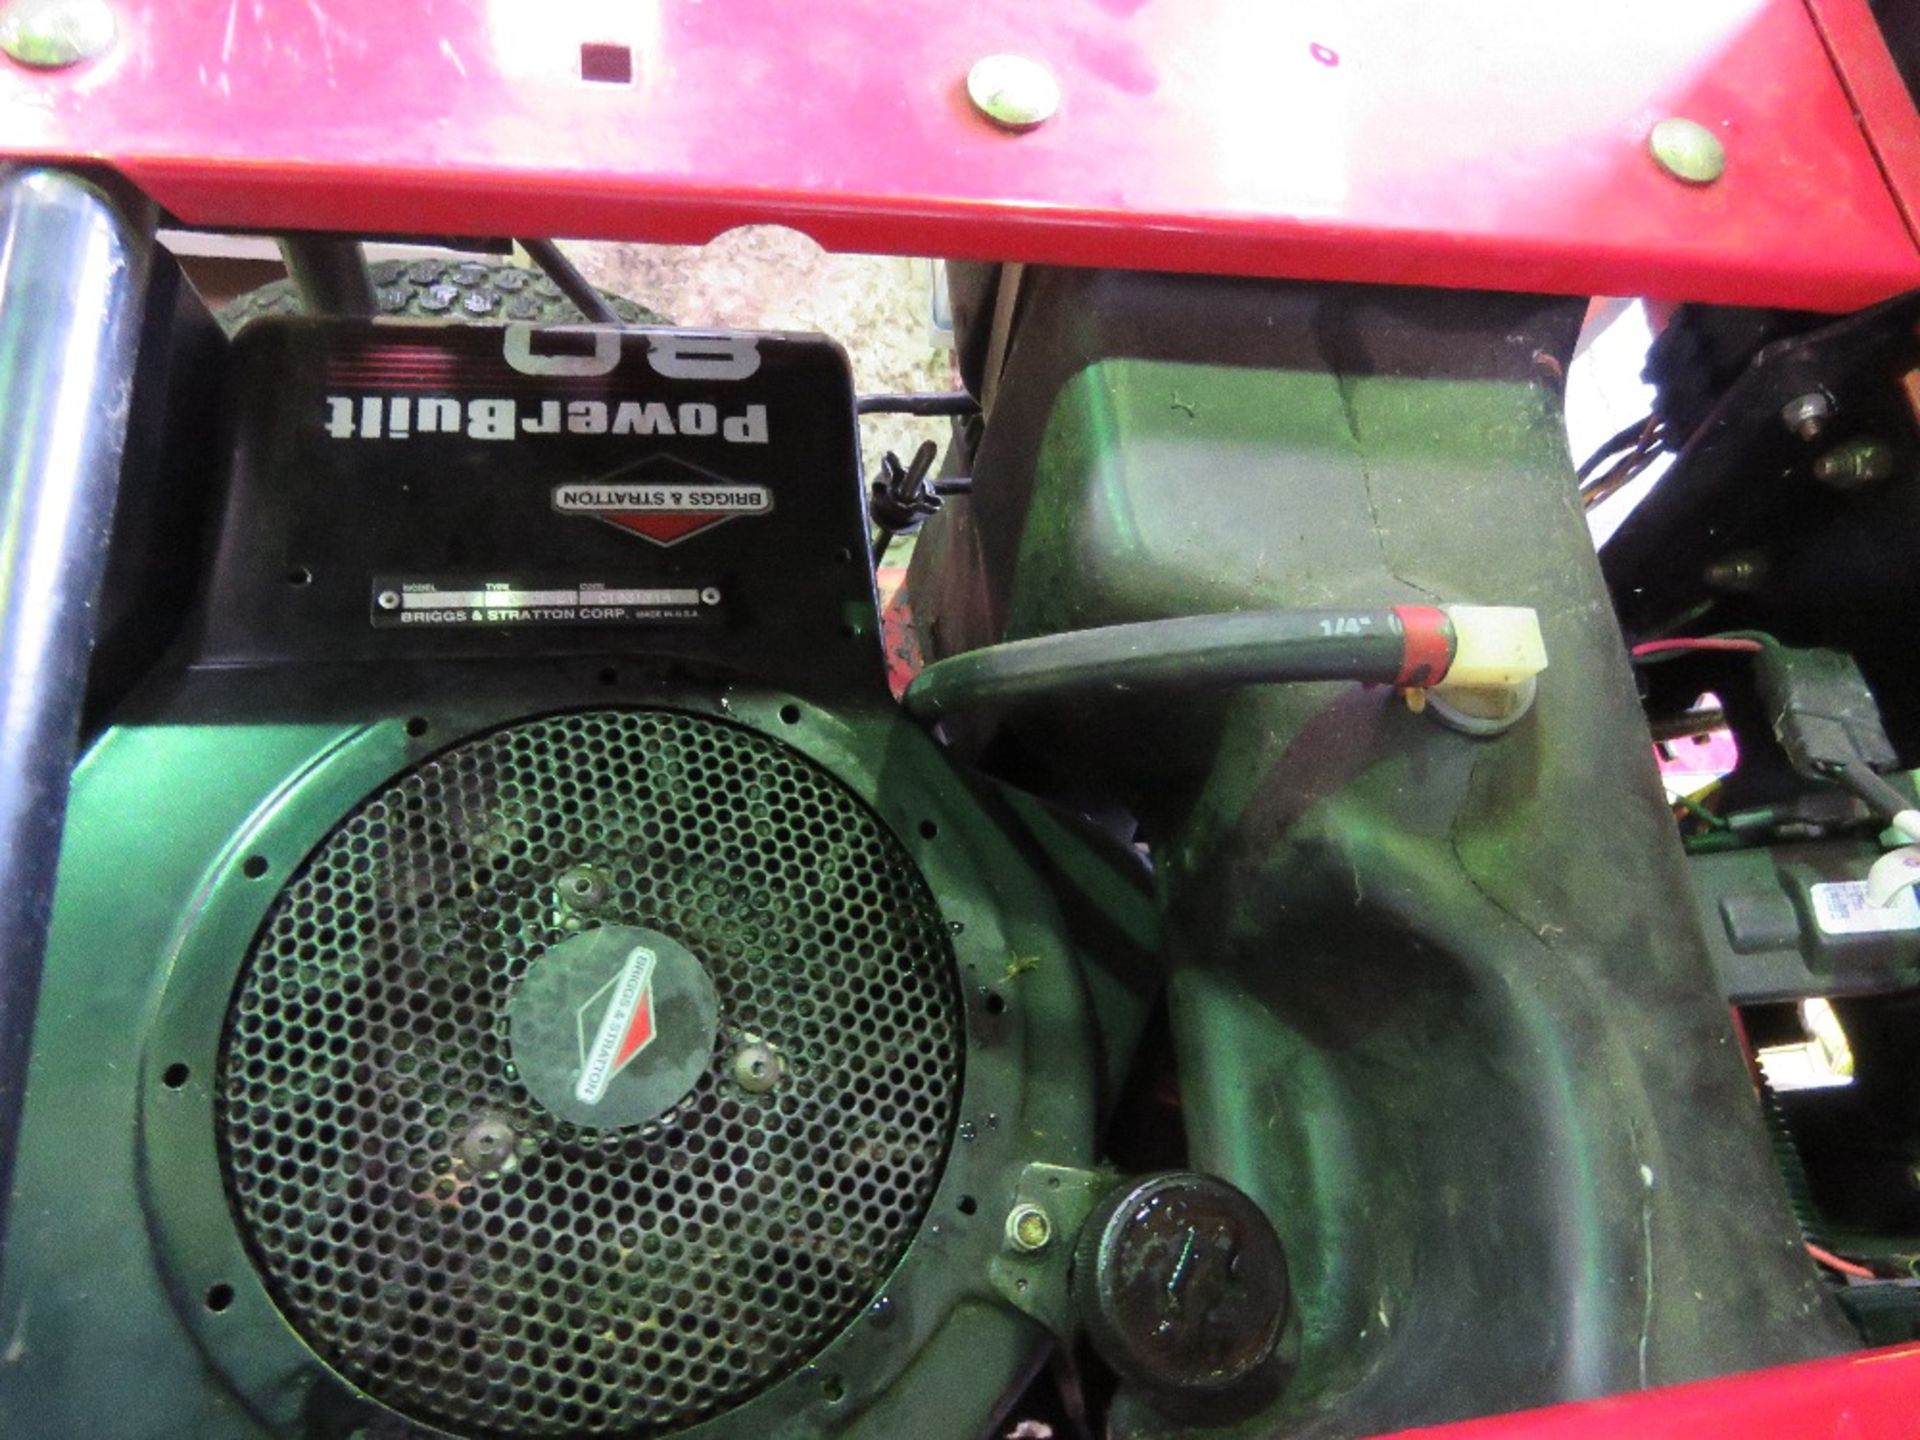 WHEELHORSE 8-25 RIDE ON MOWER. BATTERY LOW, UNTESTED.....THIS LOT IS SOLD UNDER THE AUCTIONEERS MARG - Image 7 of 7